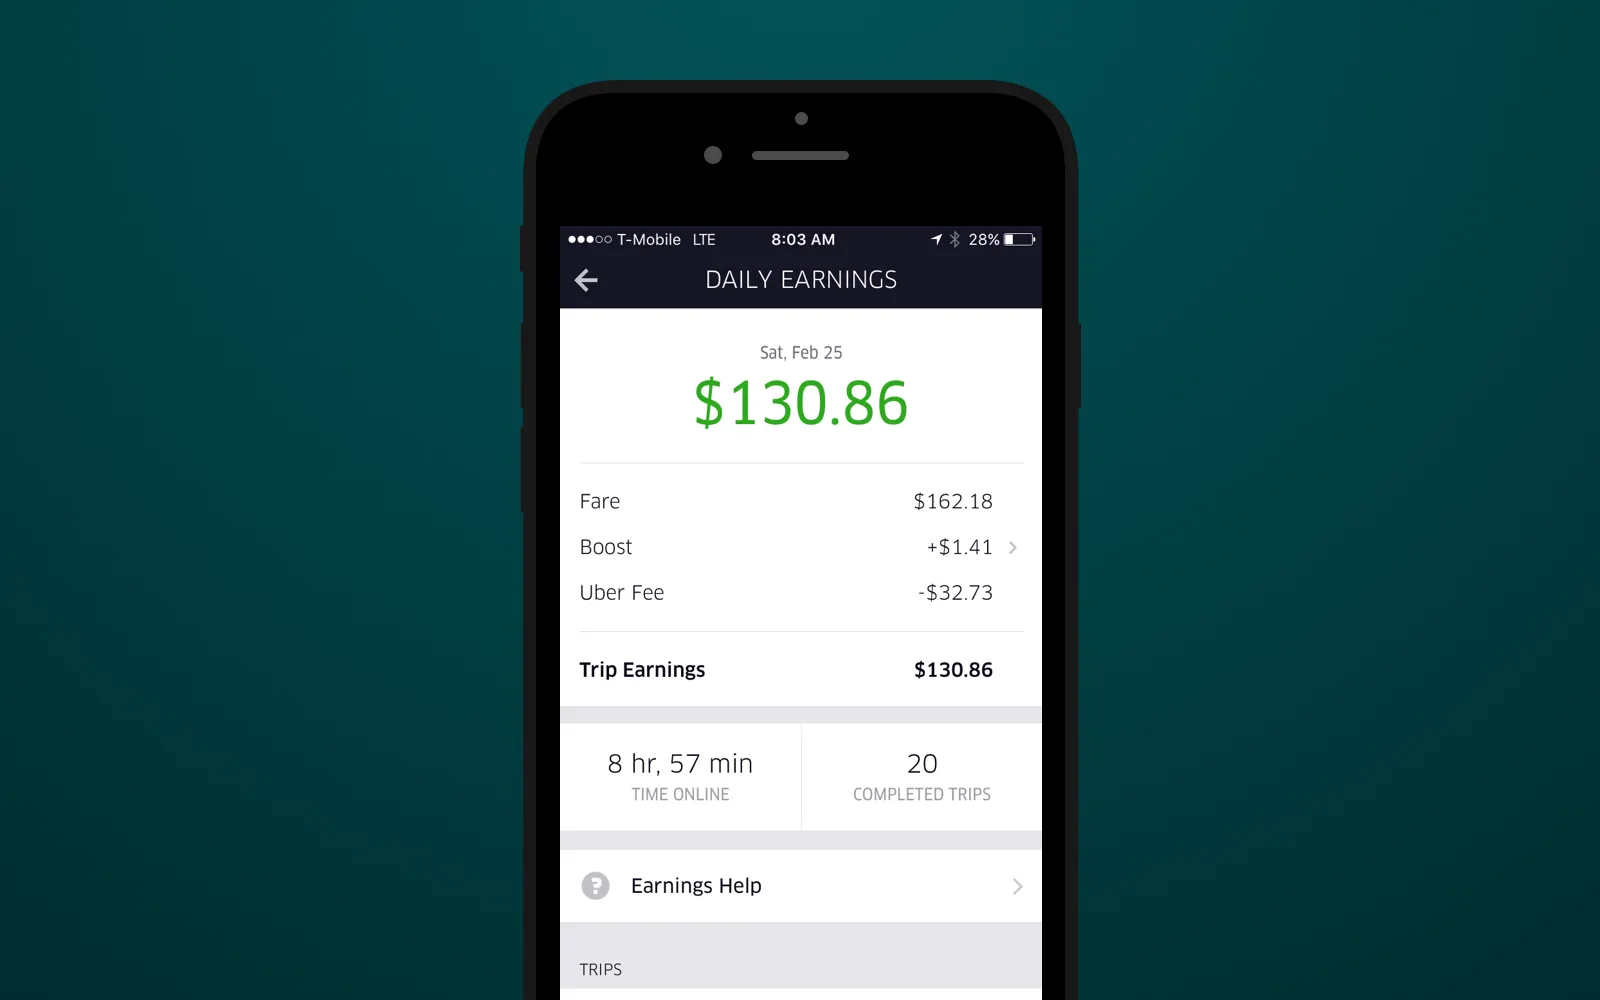 Couriers can see their earnings directly in UberEats app